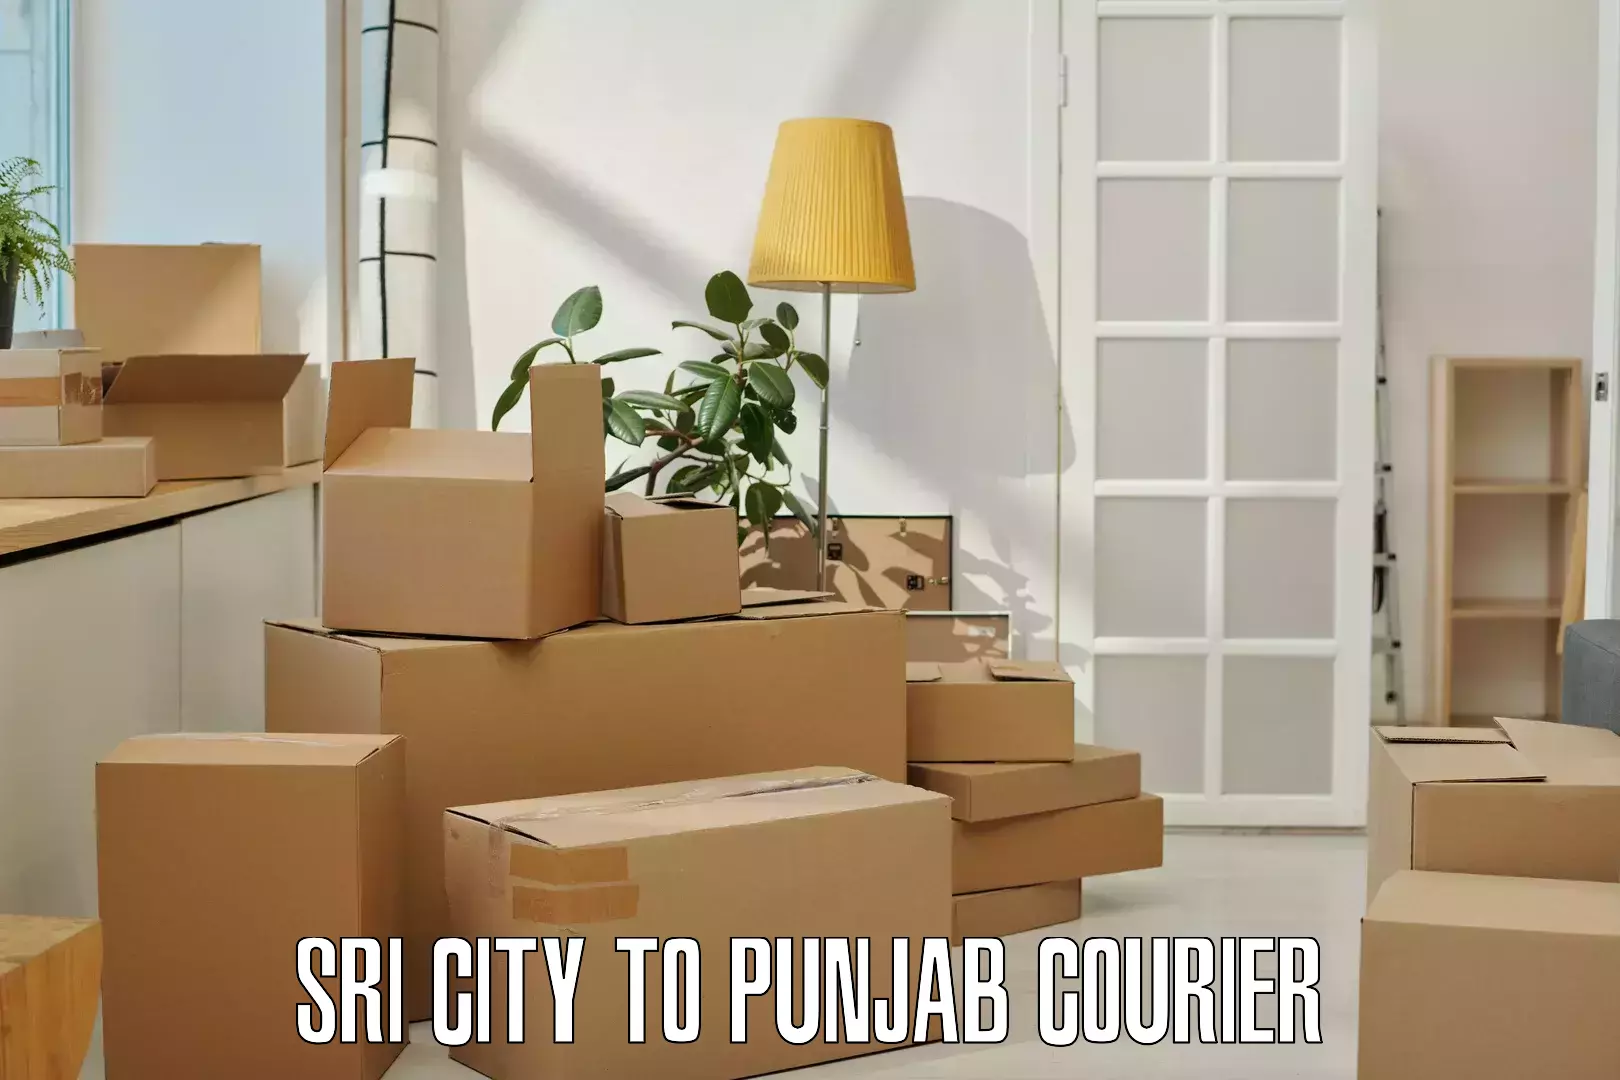 Nationwide shipping coverage in Sri City to Punjab